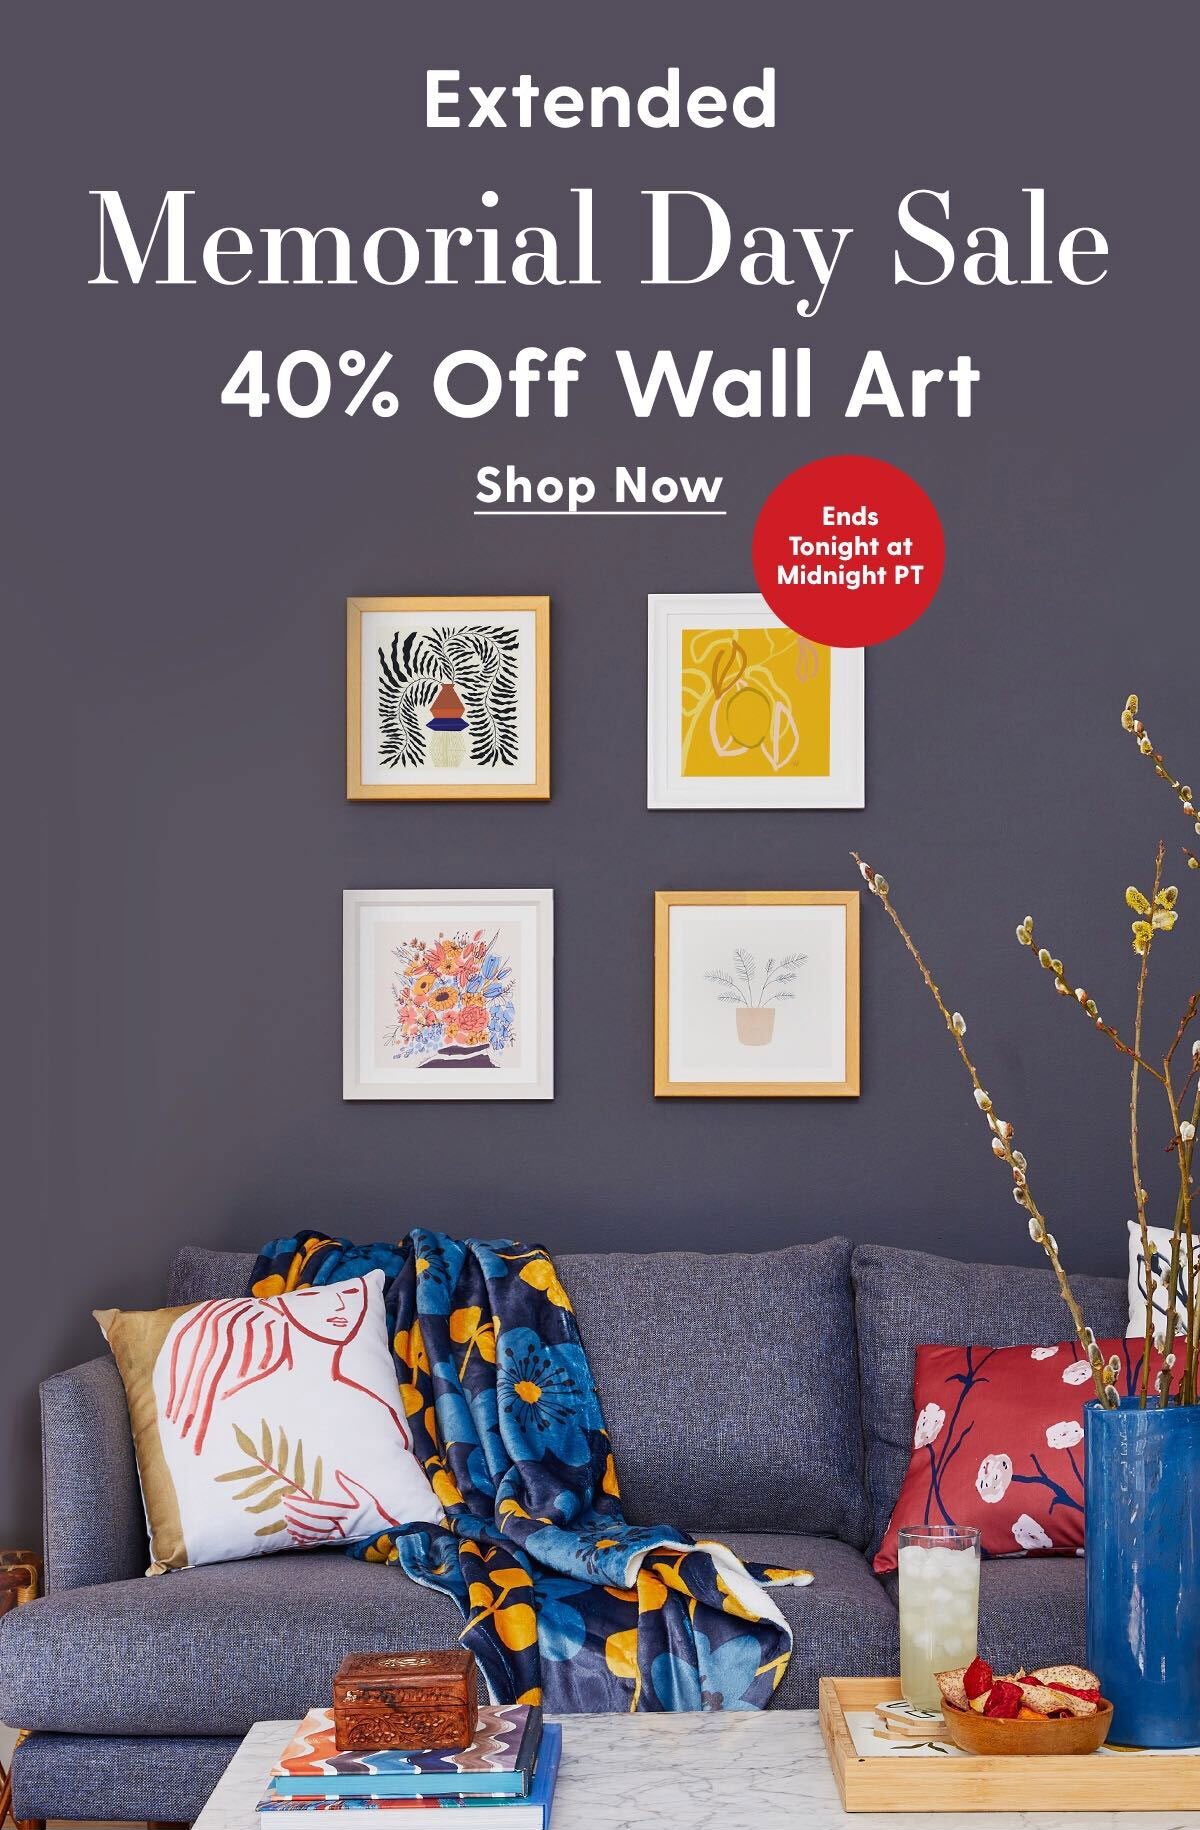 Extended Memorial Day Sale. 40% Off Wall Art. Ends Tonight at Midnight PT. Shop Now →